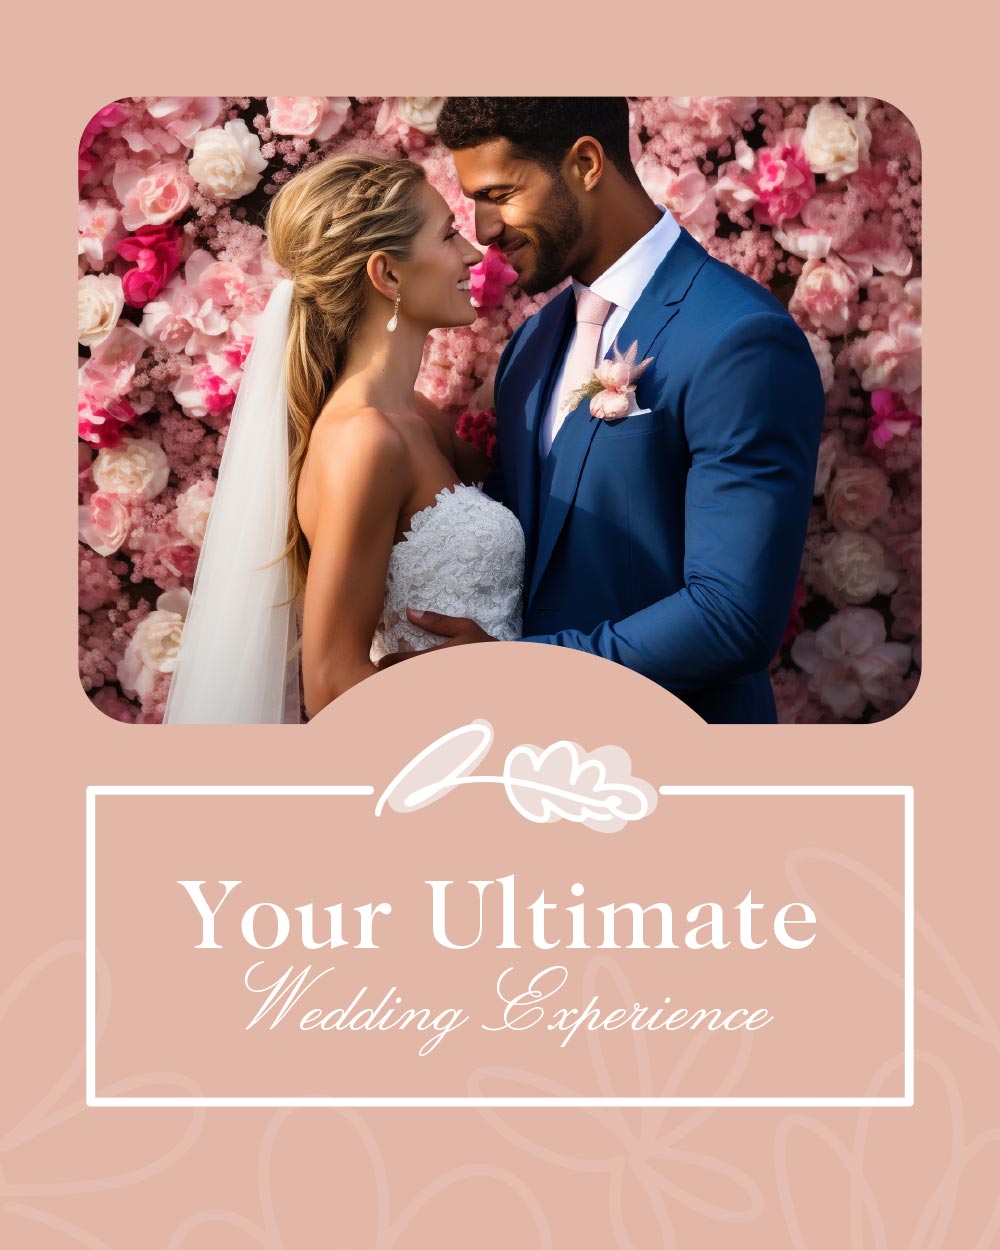 A bride and groom smiling at each other, surrounded by pink and white flowers, with the text 'Your Ultimate Wedding Experience' overlayed. Weddings at Fabulous Flowers and Gifts.